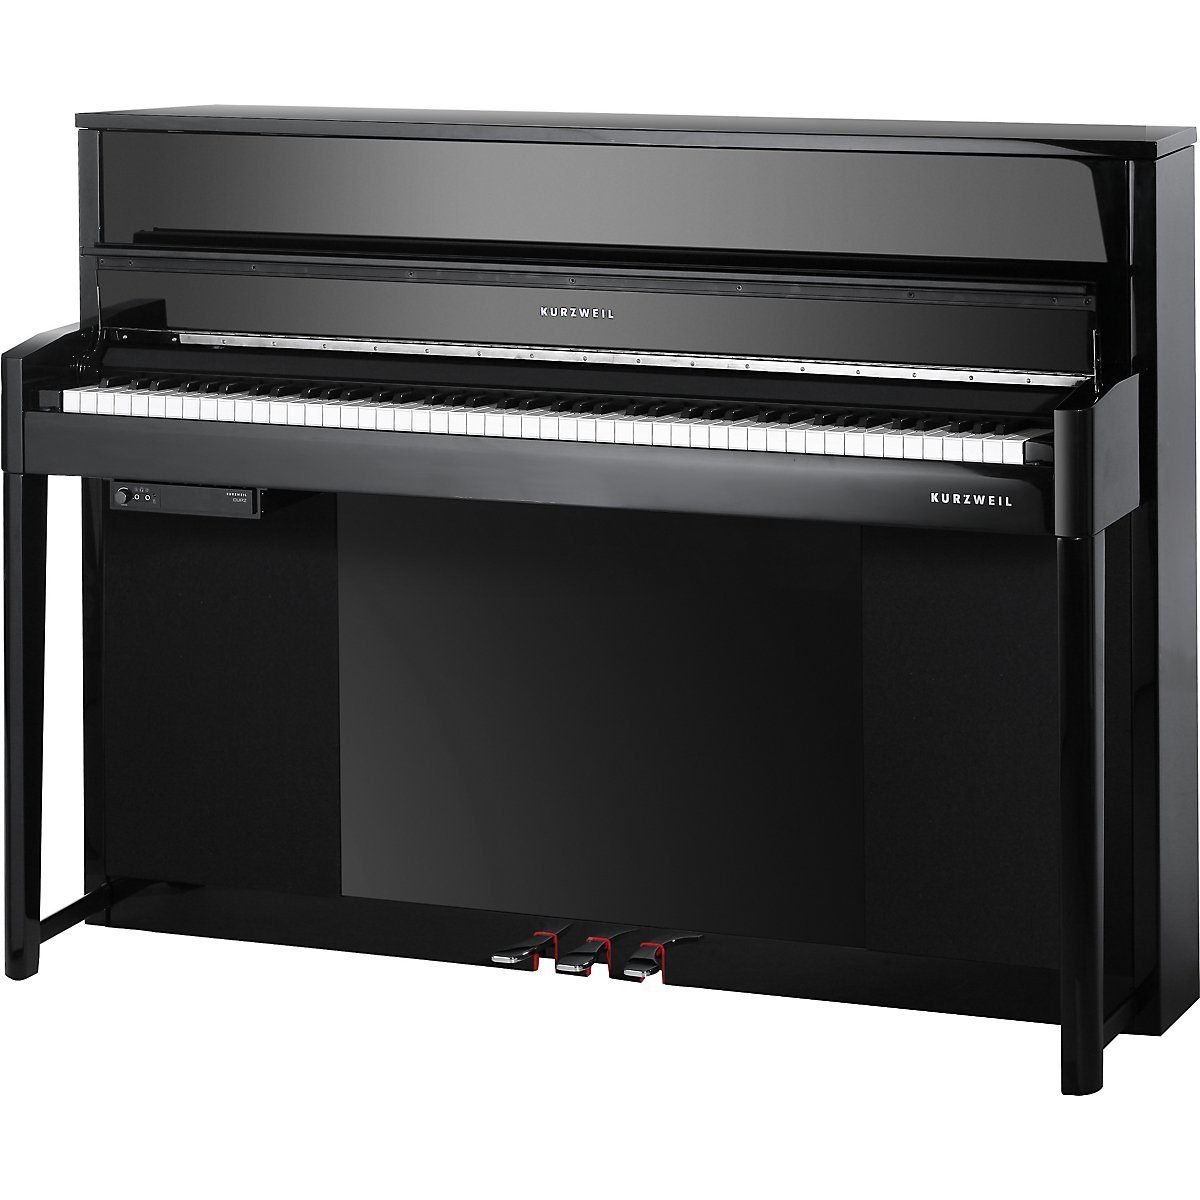 What Features Are Important When Selecting The Best Upright Digital Piano